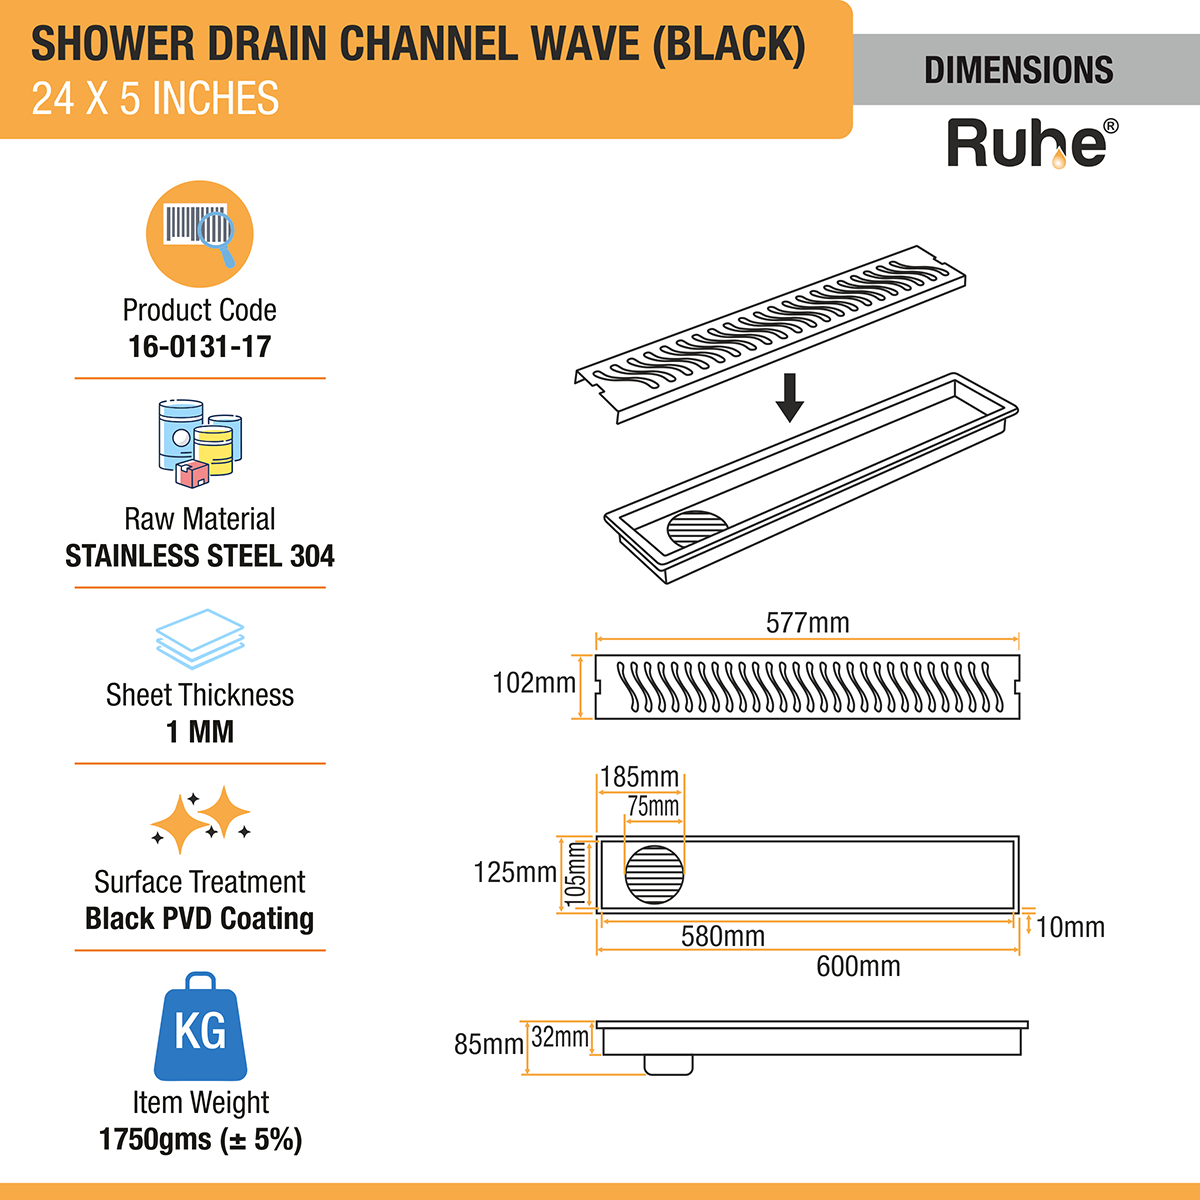 Wave Shower Drain Channel (24 x 5 Inches) Black PVD Coated dimensions and sizes